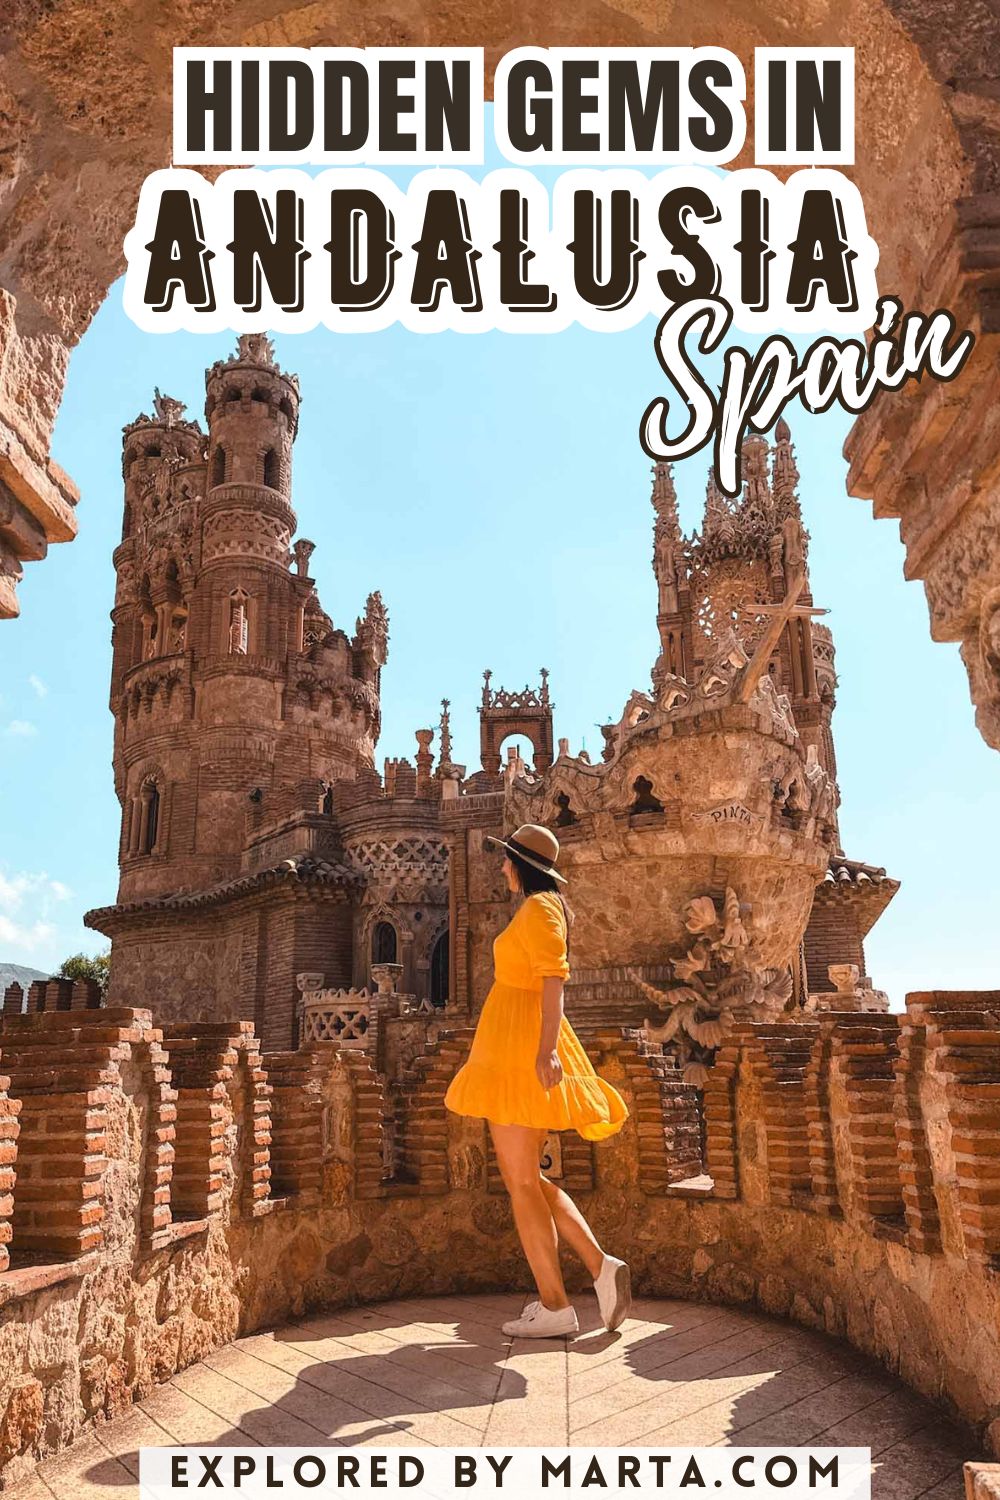 Amazing must-see hidden gems in Andalusia, Spain